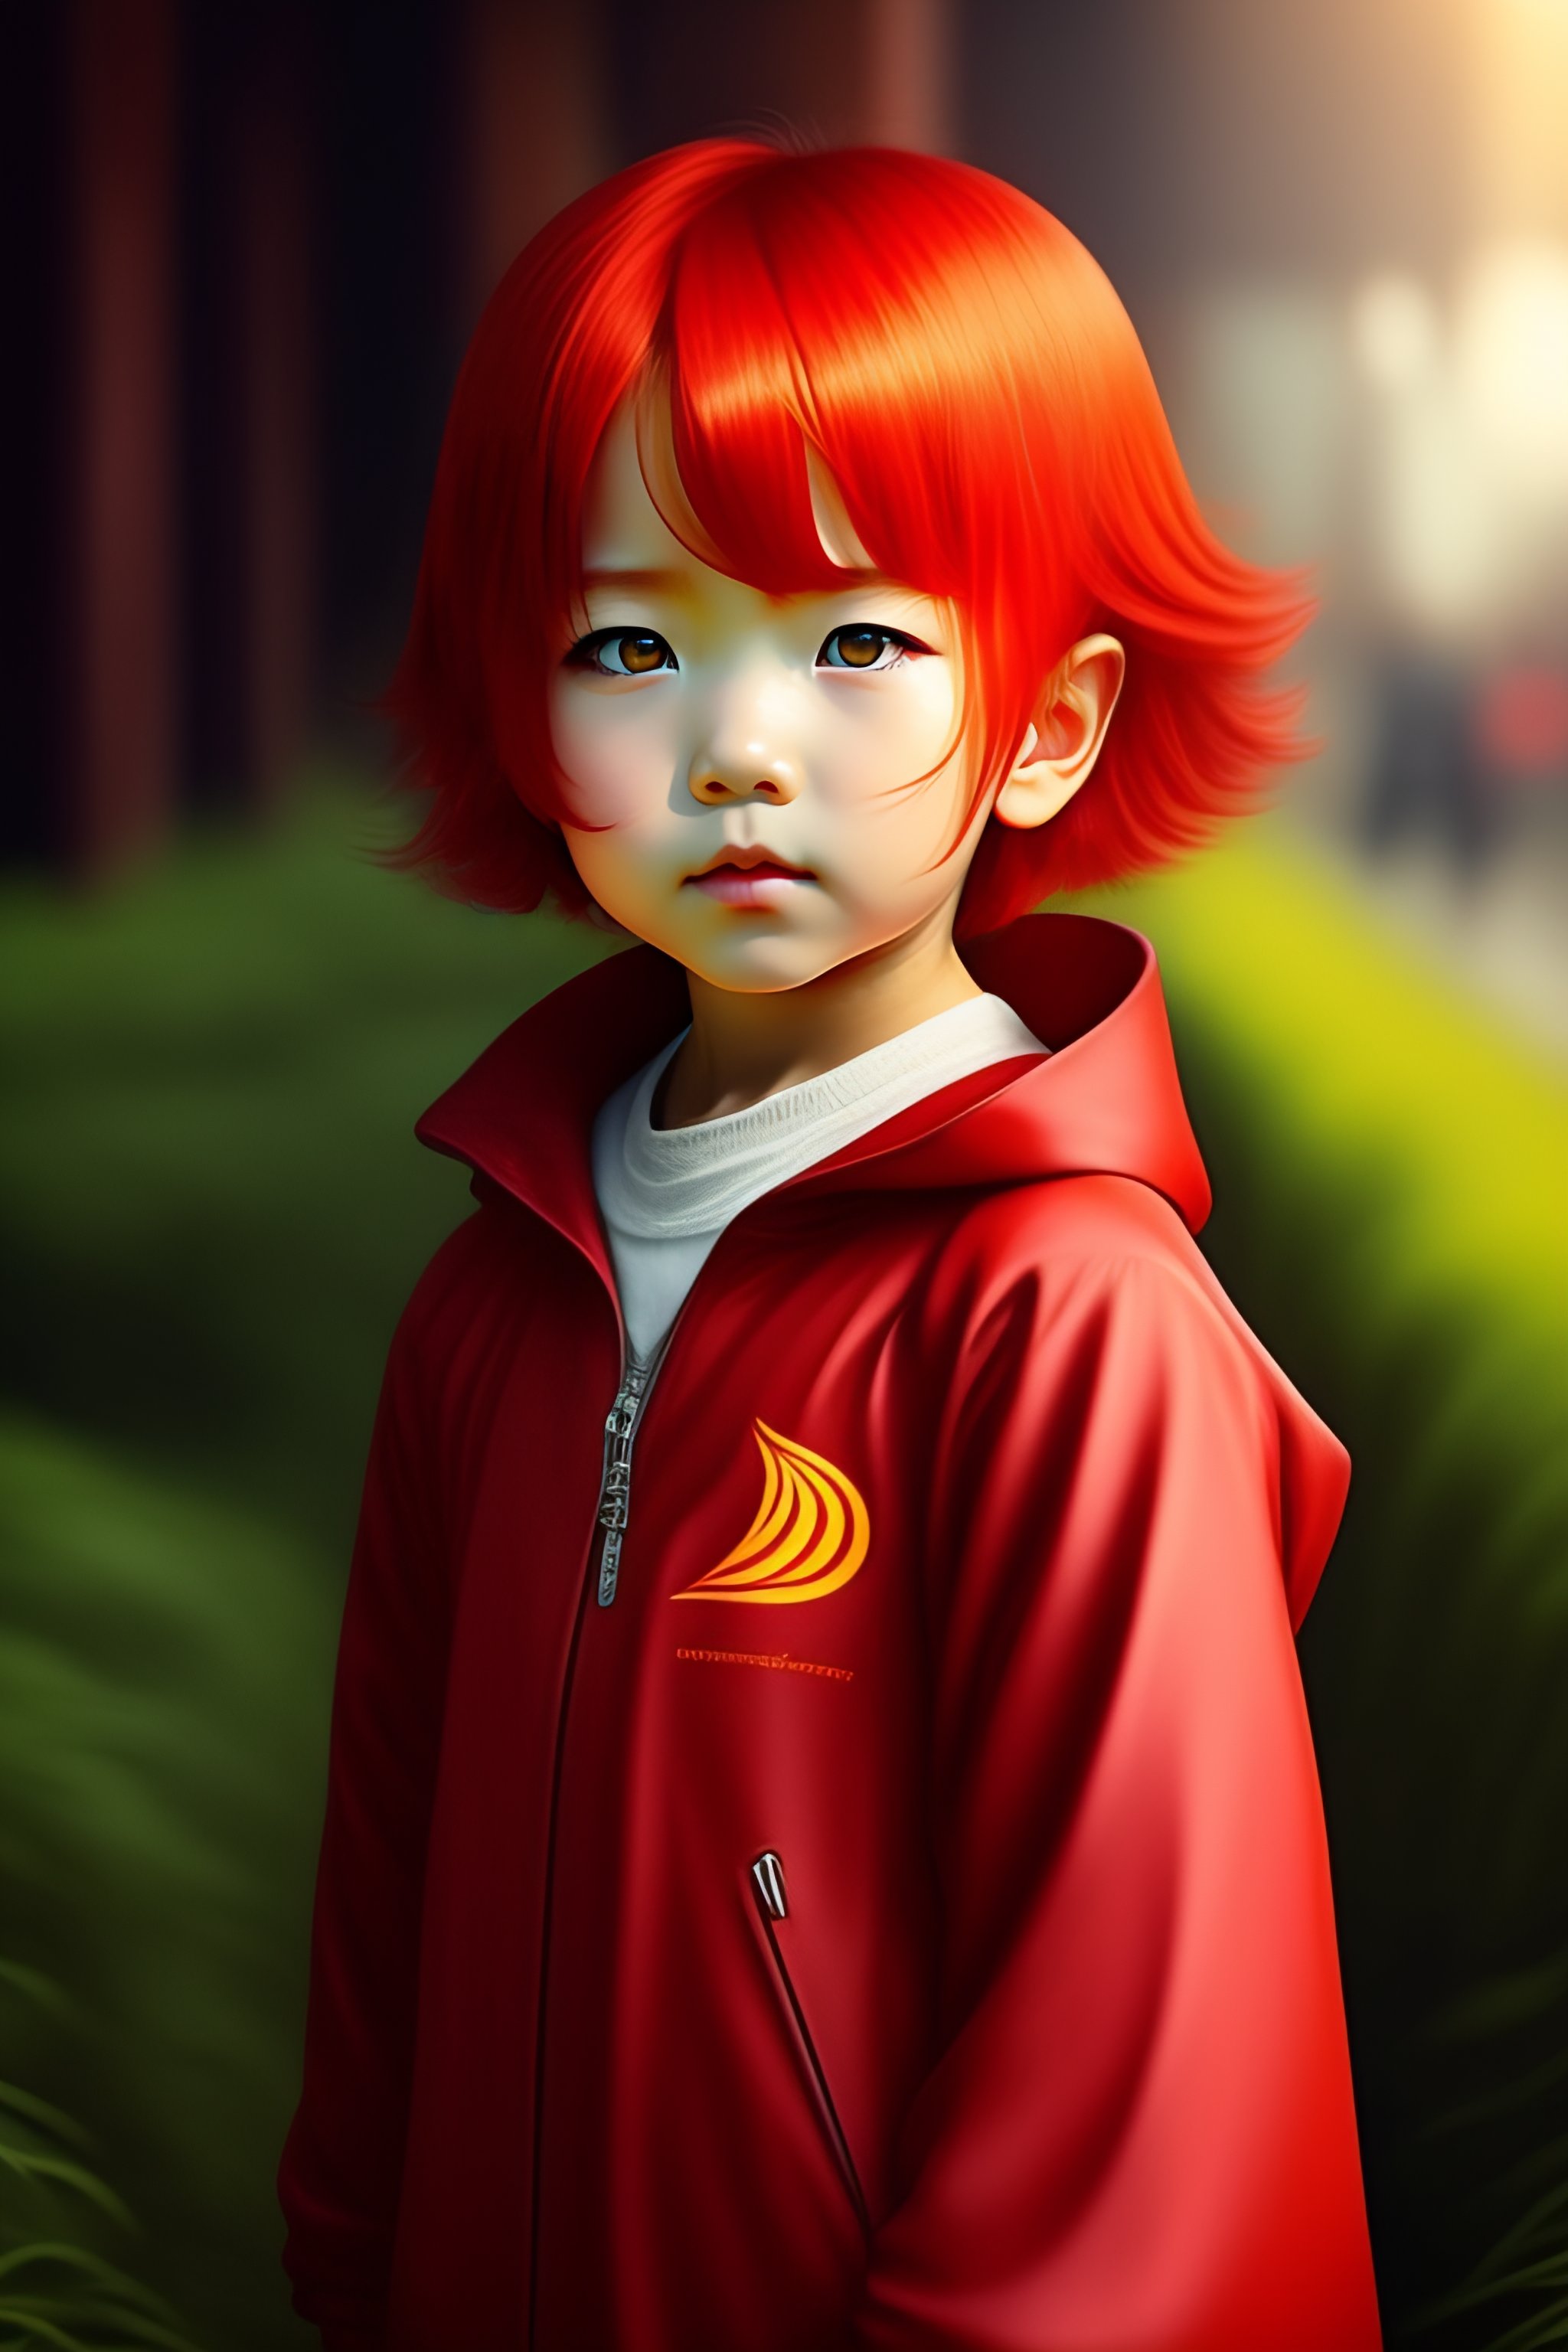 little anime boy with red hair